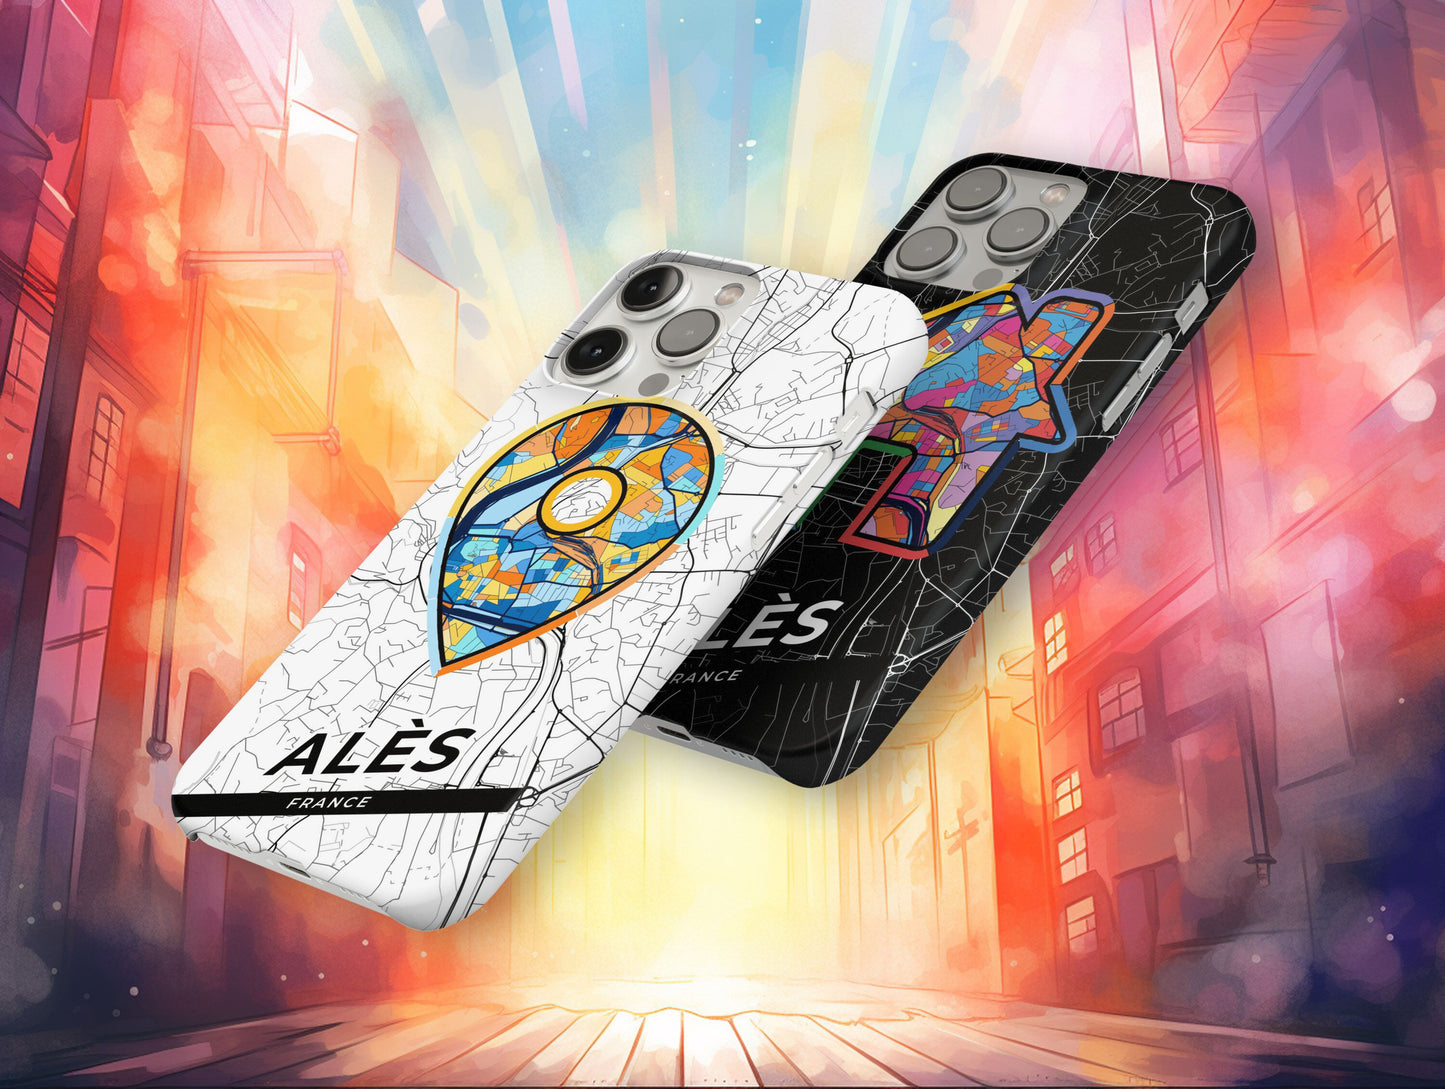 Alès France slim phone case with colorful icon. Birthday, wedding or housewarming gift. Couple match cases.